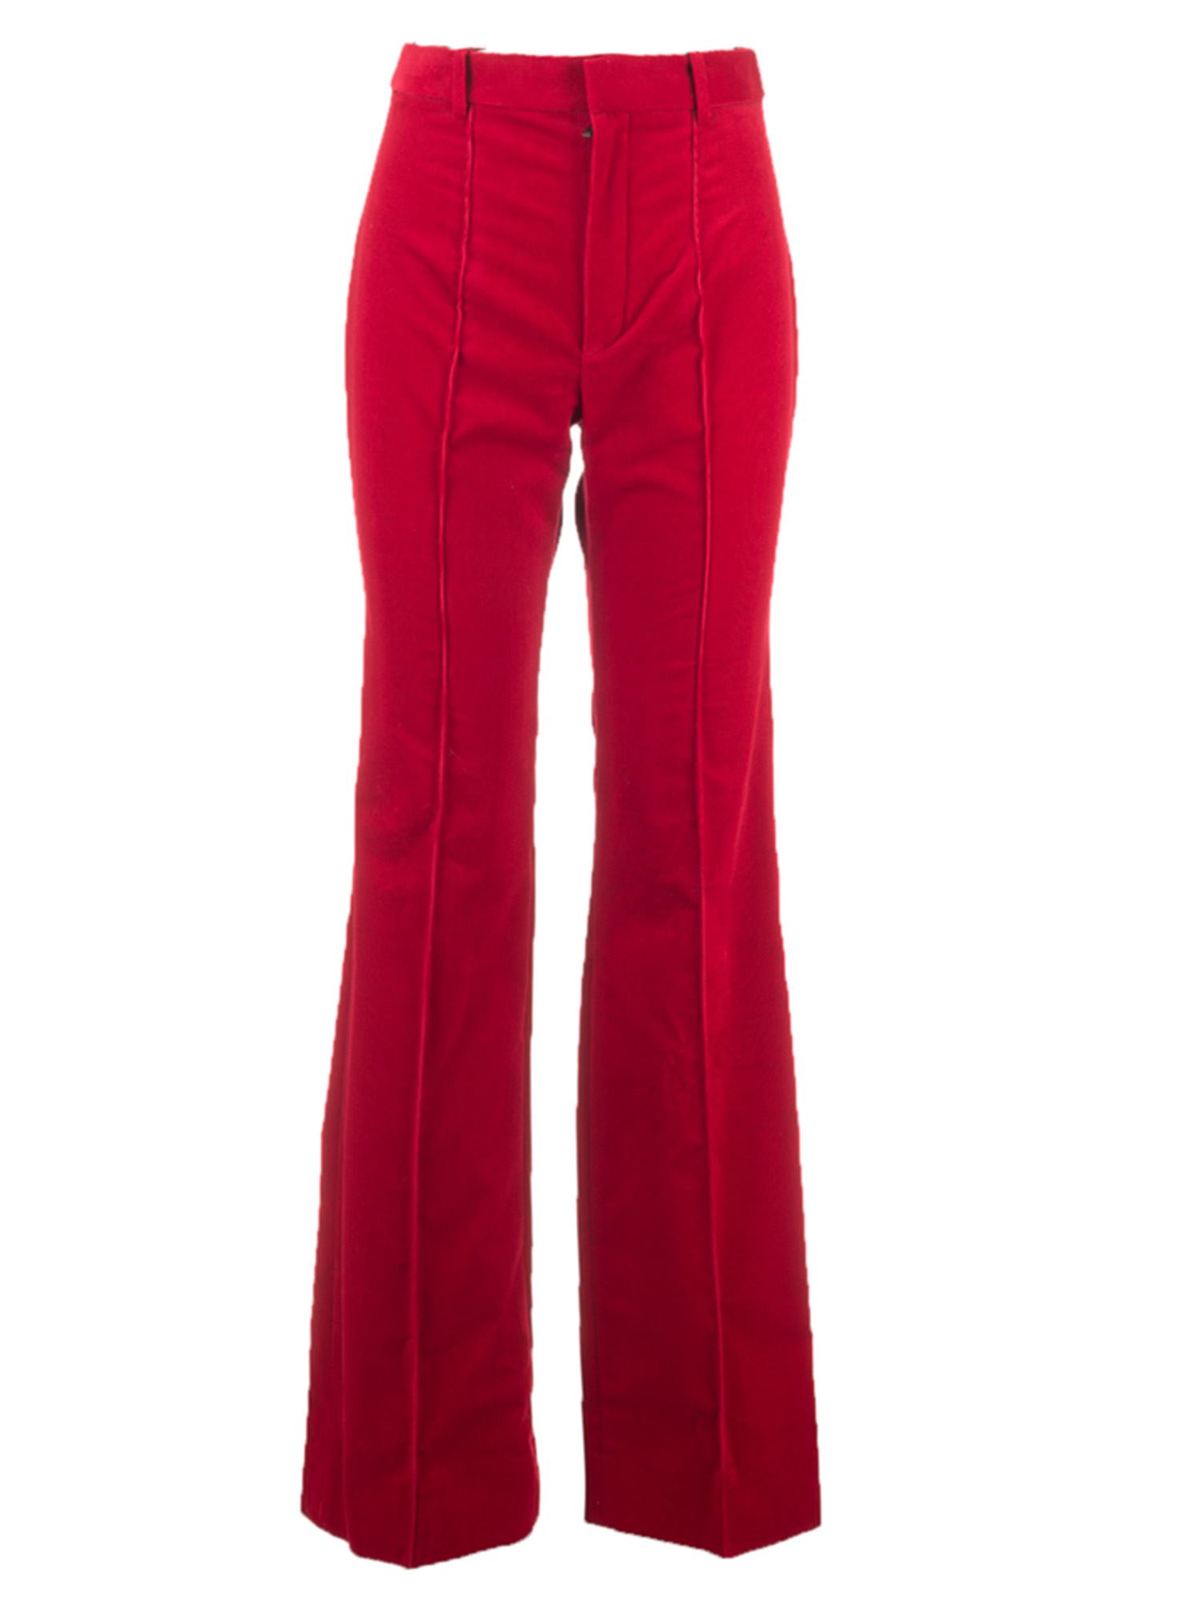 Saint Laurent - Corduroy flared pants in red - casual trousers ...